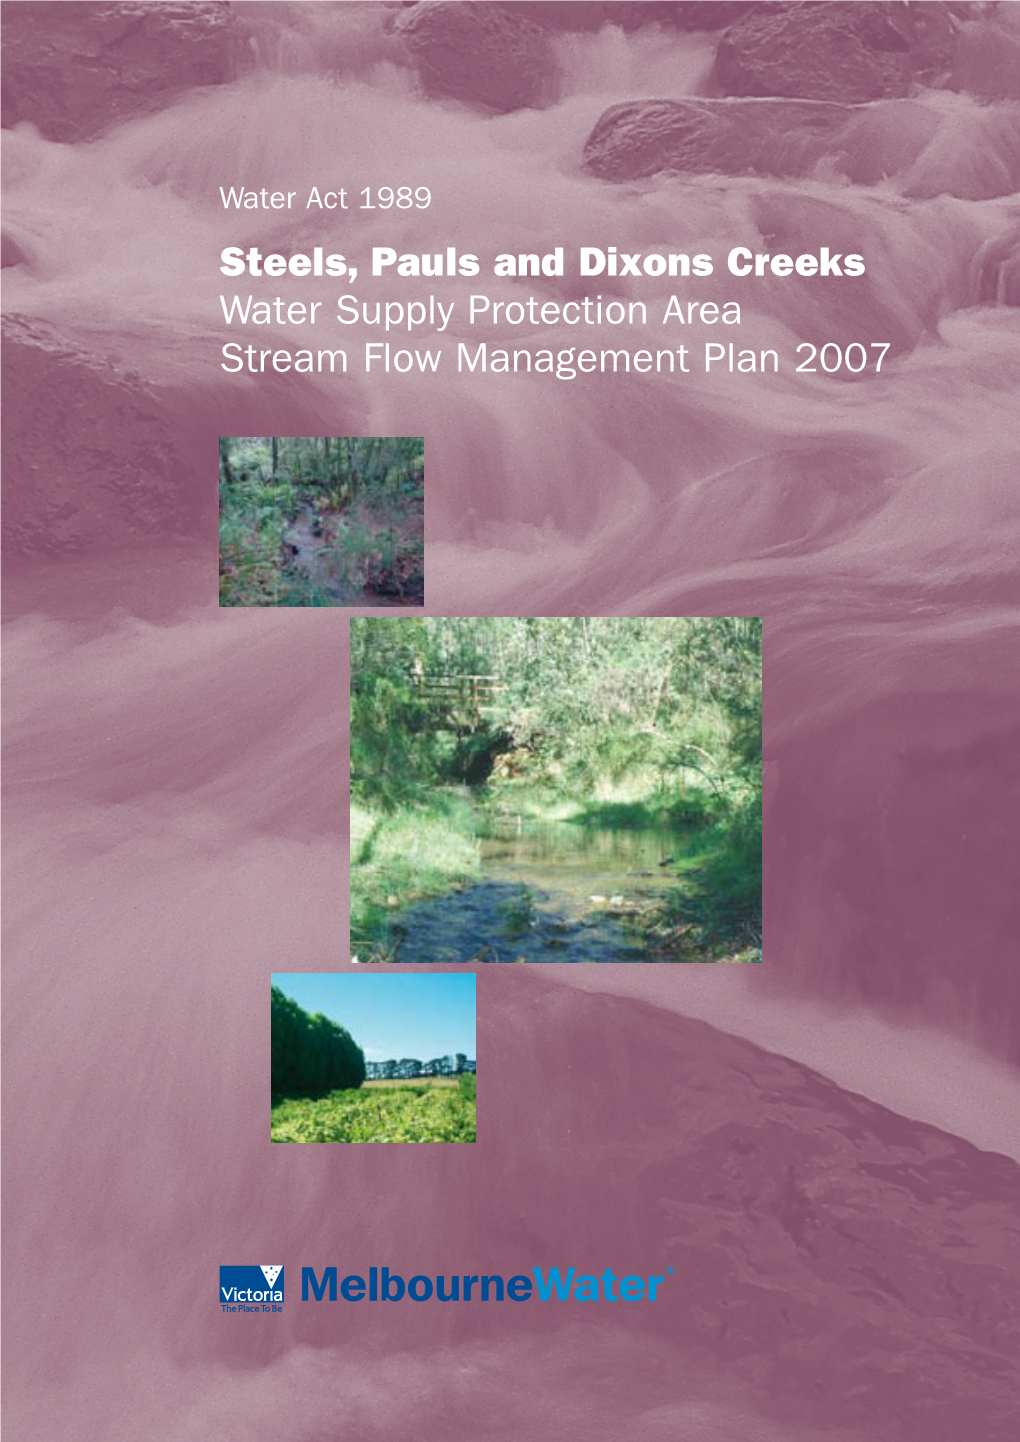 Steels, Pauls and Dixons Creeks Water Supply Protection Area